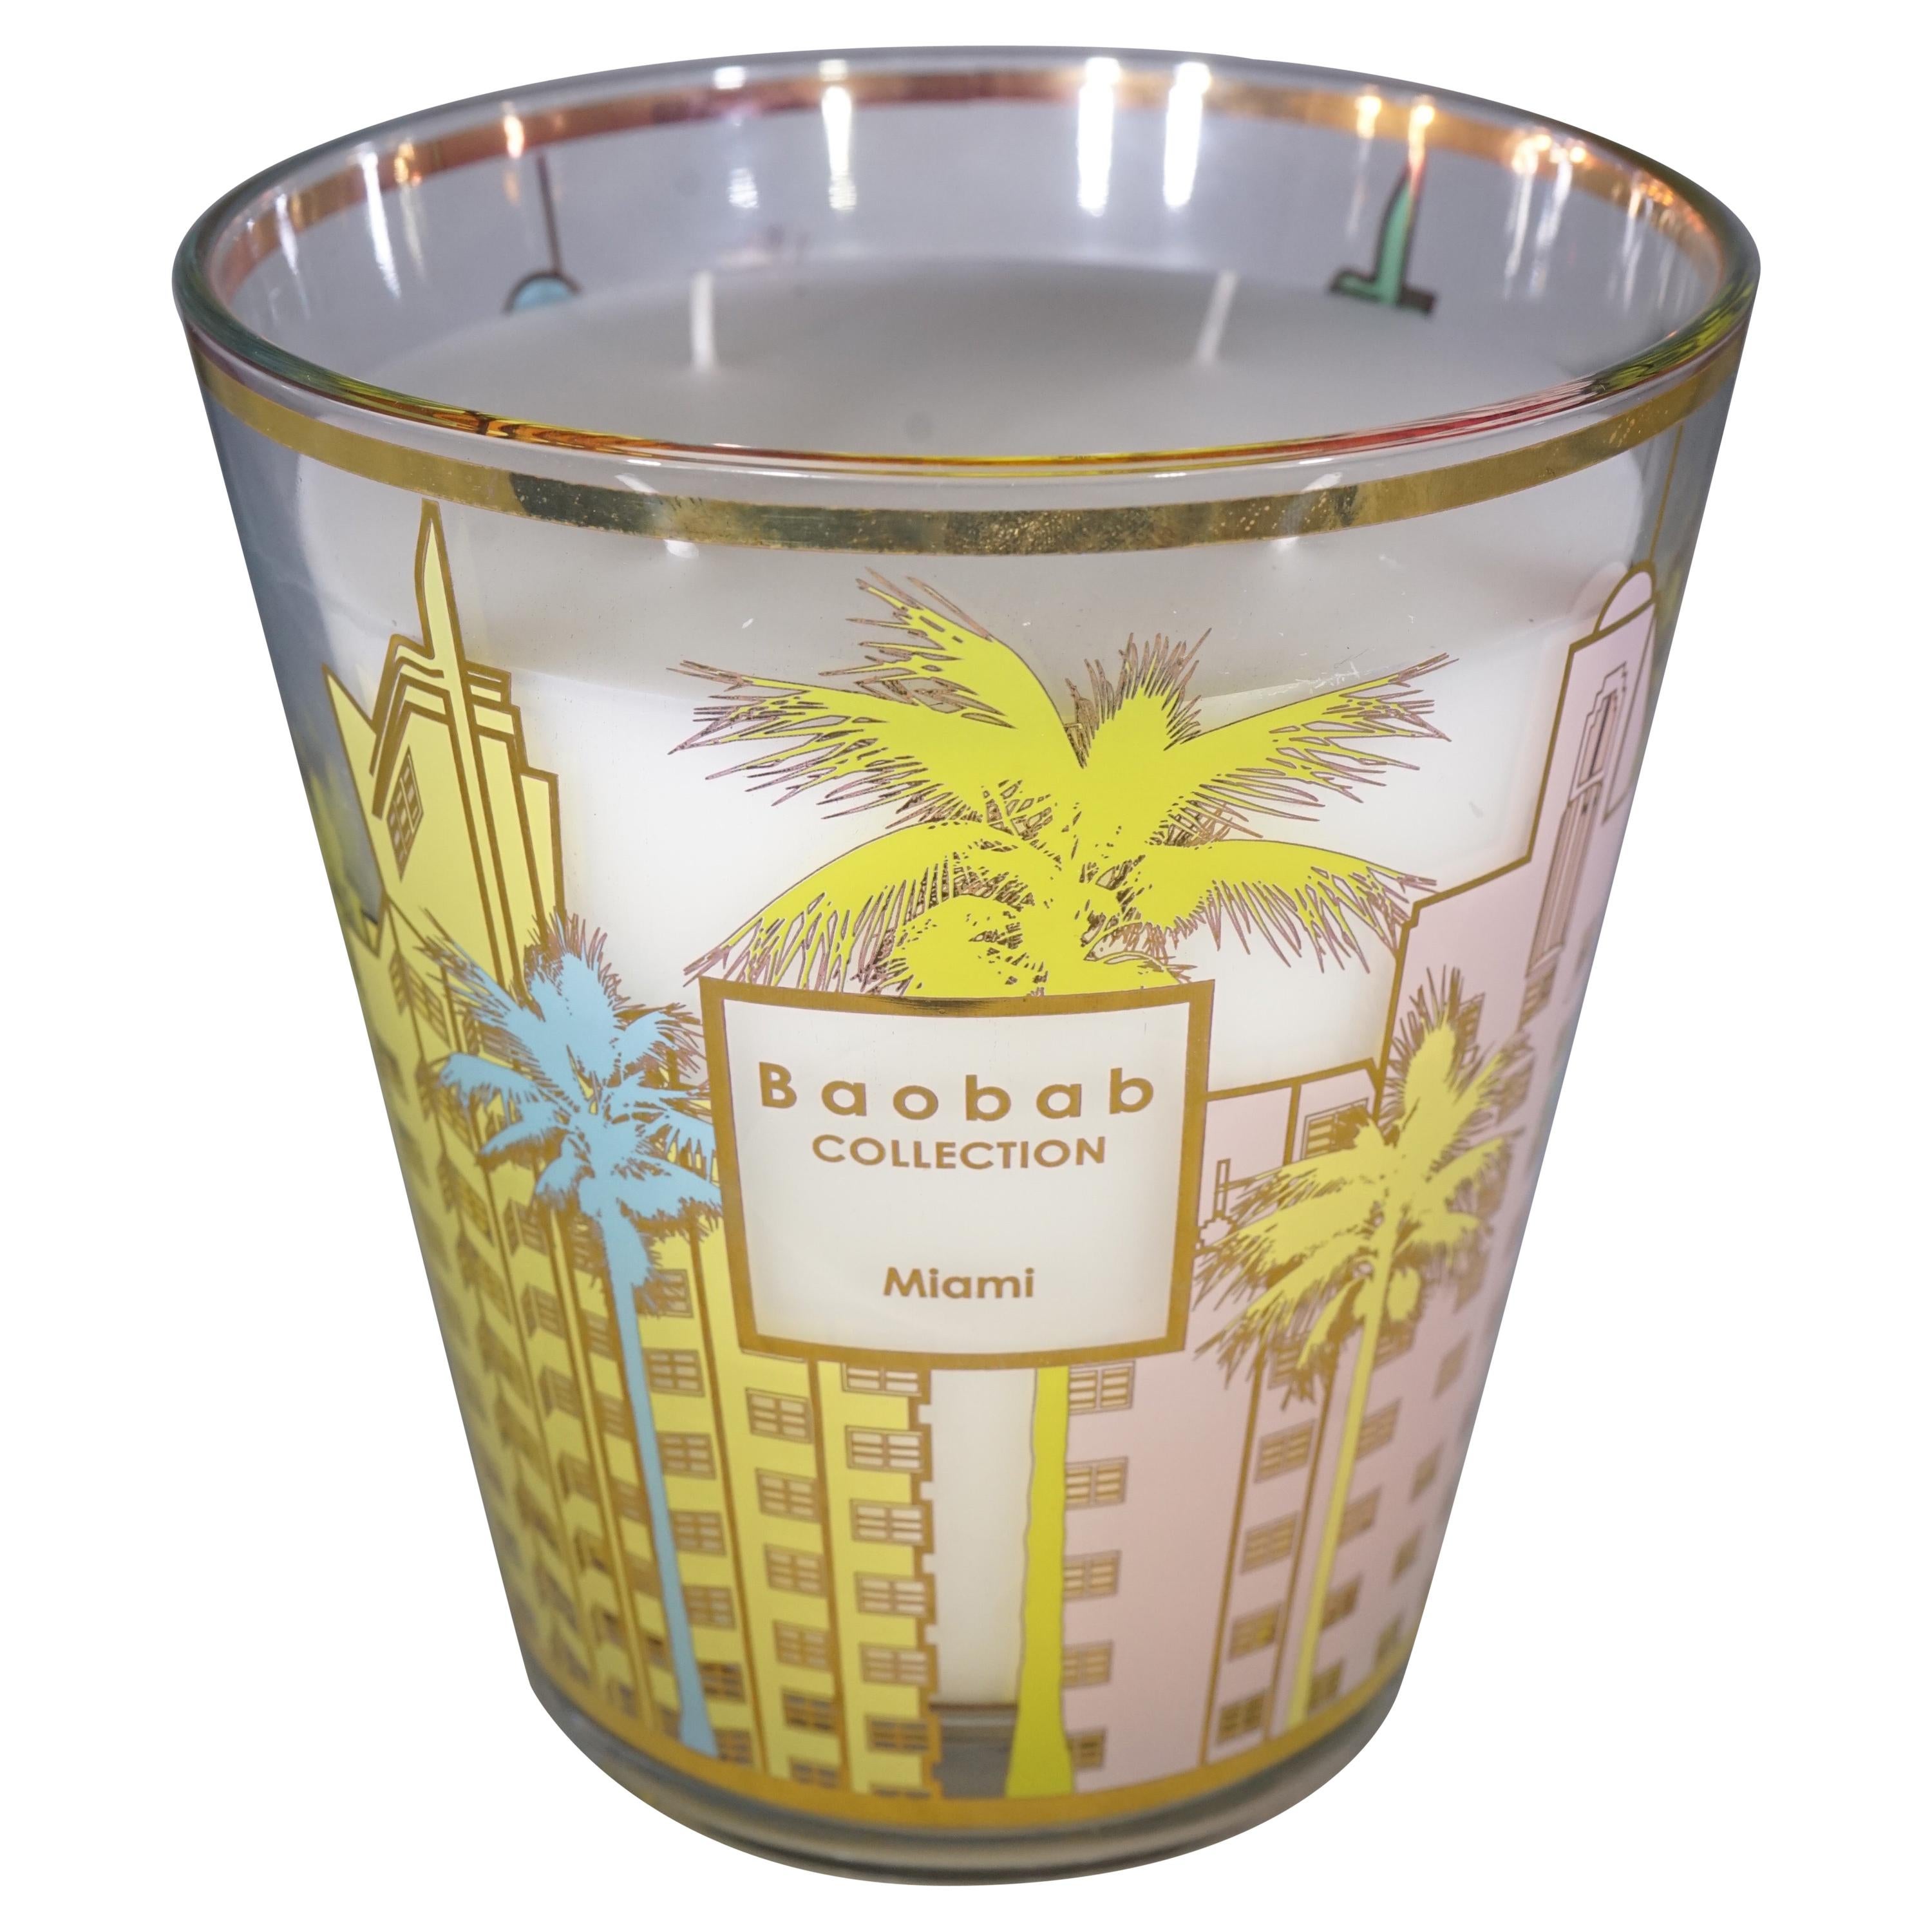 Contemporary Baobab Collection Luxury Scented Miami Medium Candle